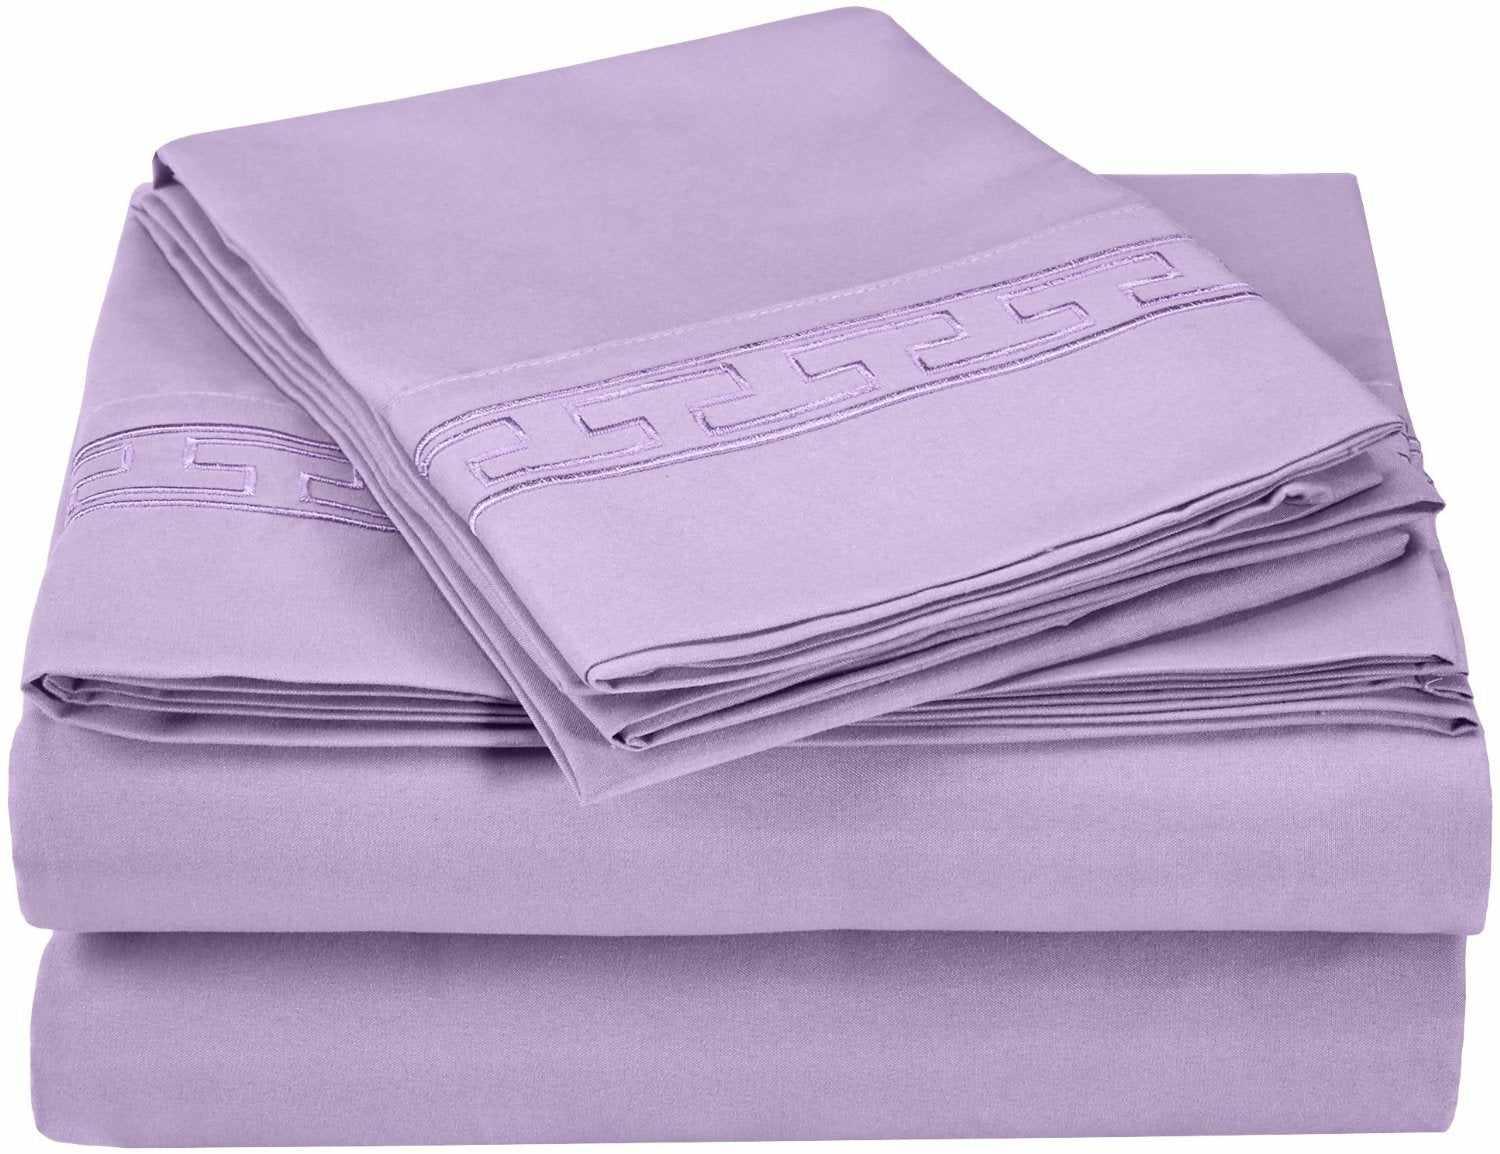  Superior Executive 3000 Series Solid Regal Embroidery Durable Soft Wrinkle Free Sheet Set - Lilac